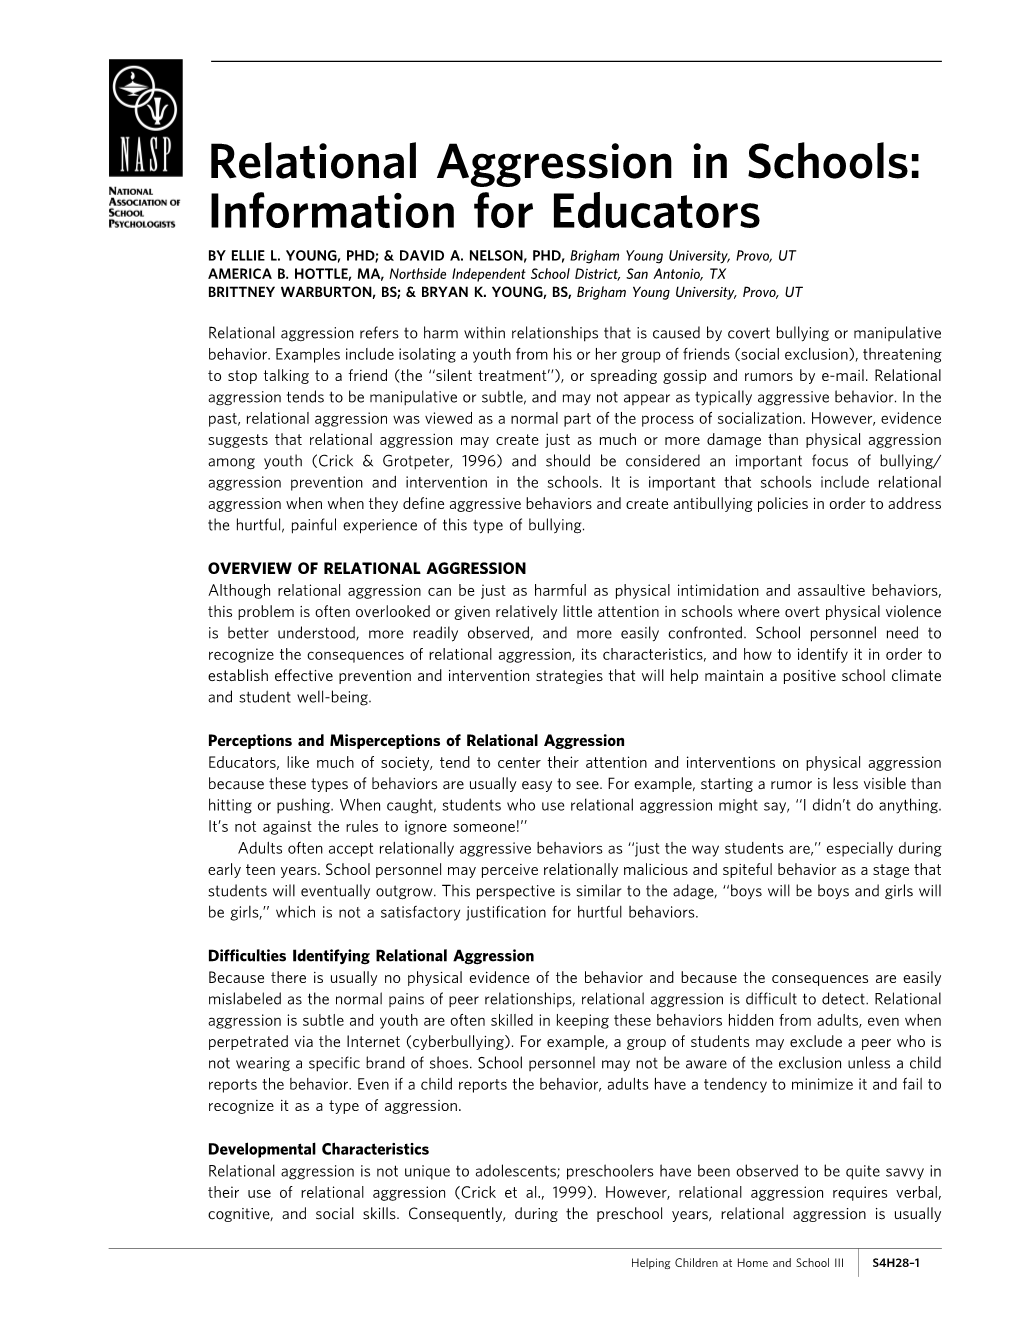 Relational Aggression in Schools: Information for Educators by ELLIE L